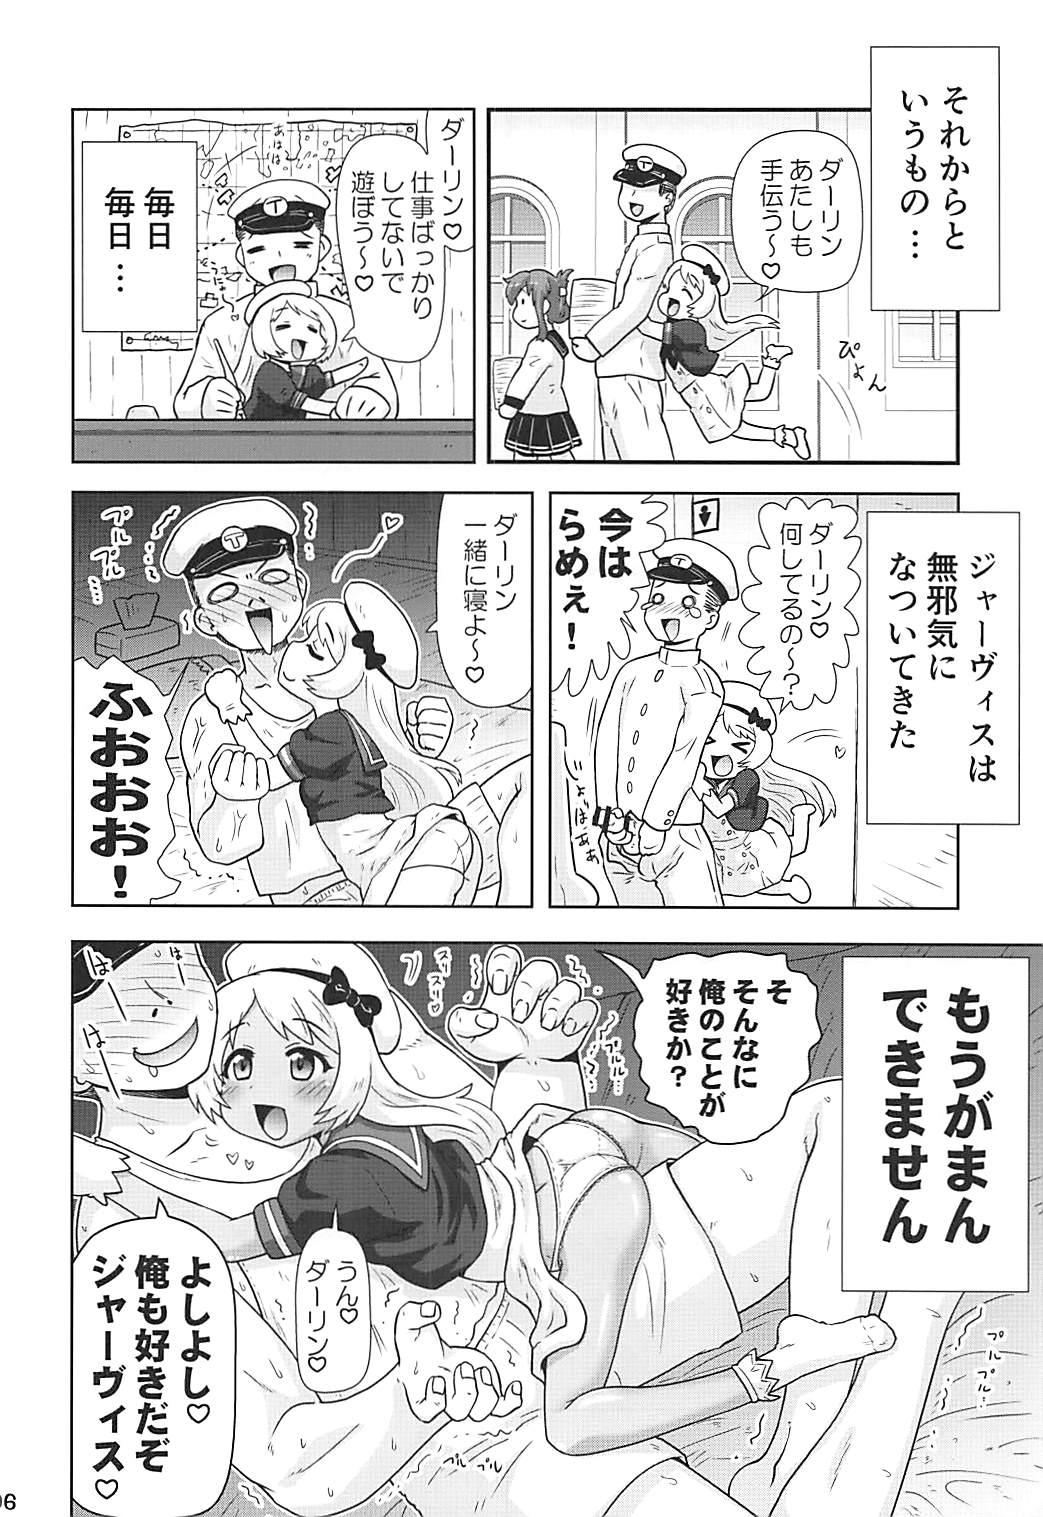 Mexicana Jervis to Otona no Darling Kankei - Kantai collection Fit - Page 5